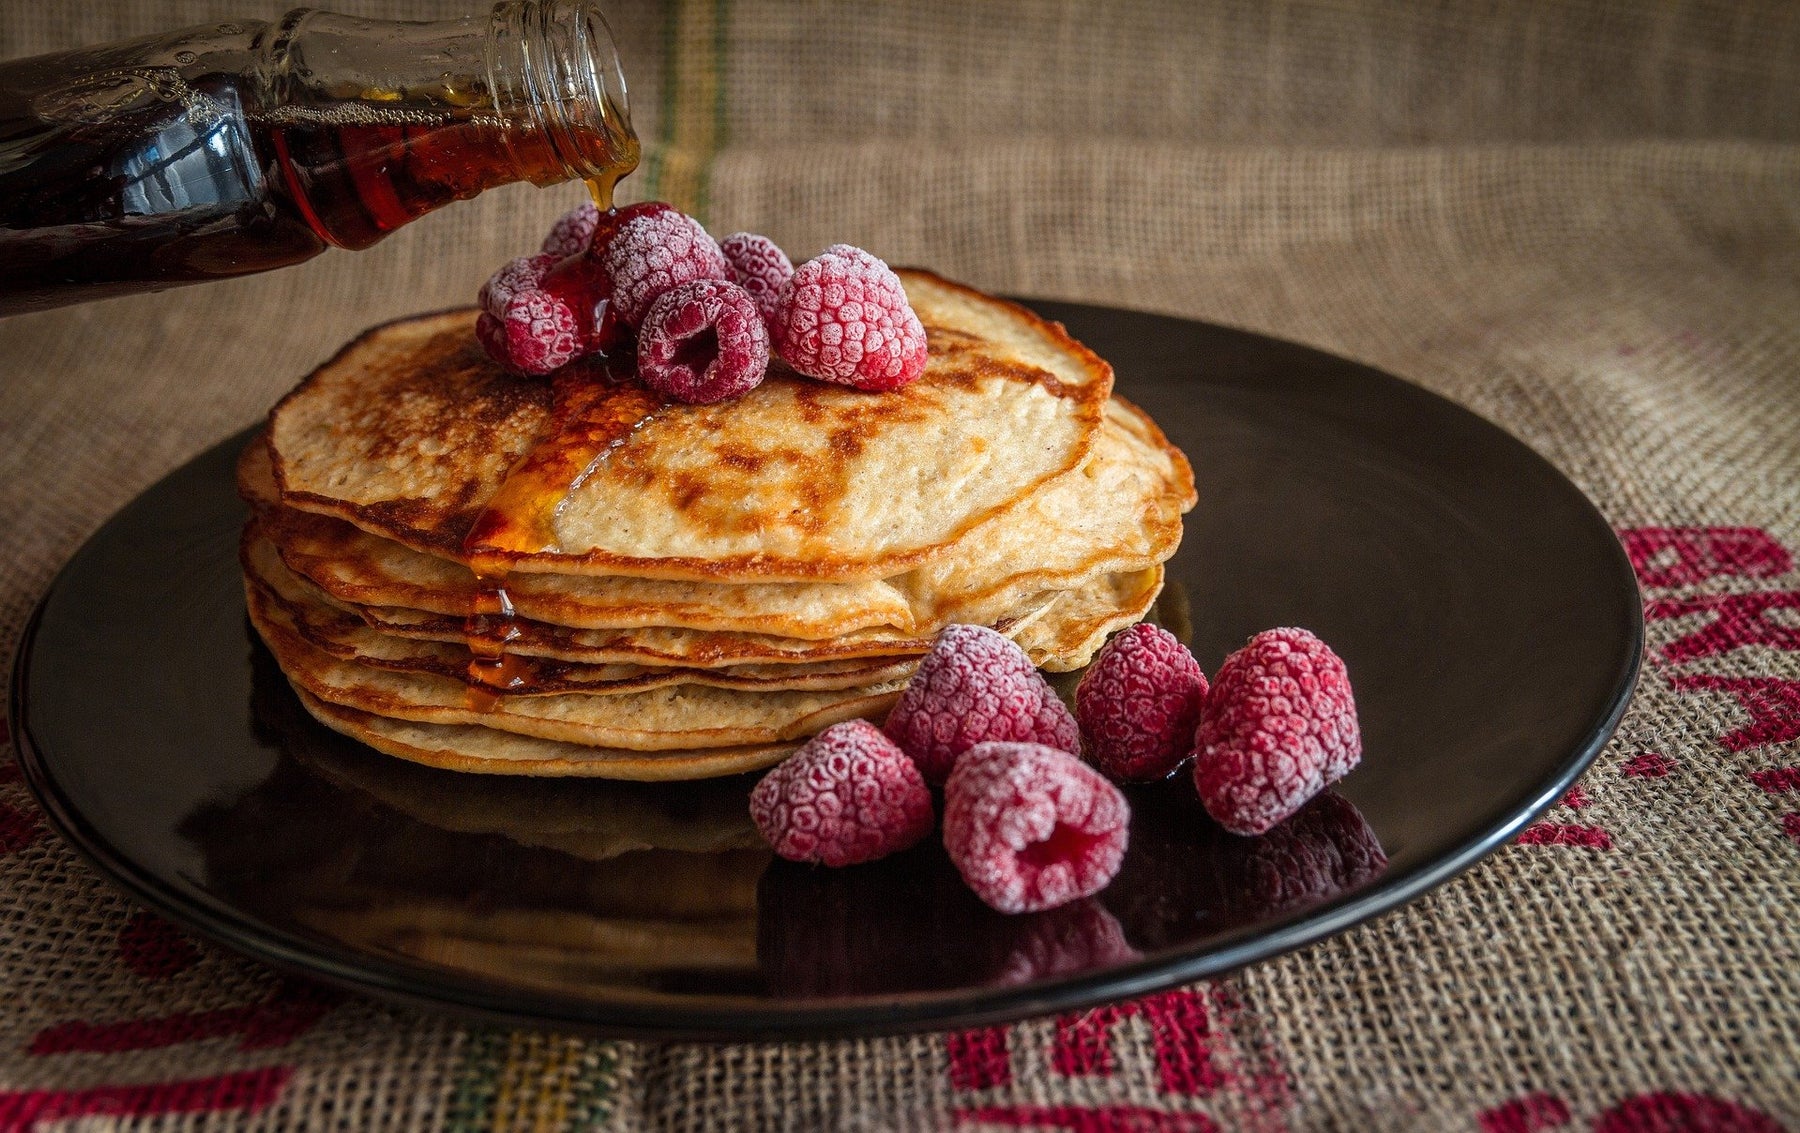 Syrup pouring over pancakes topped with raspberries